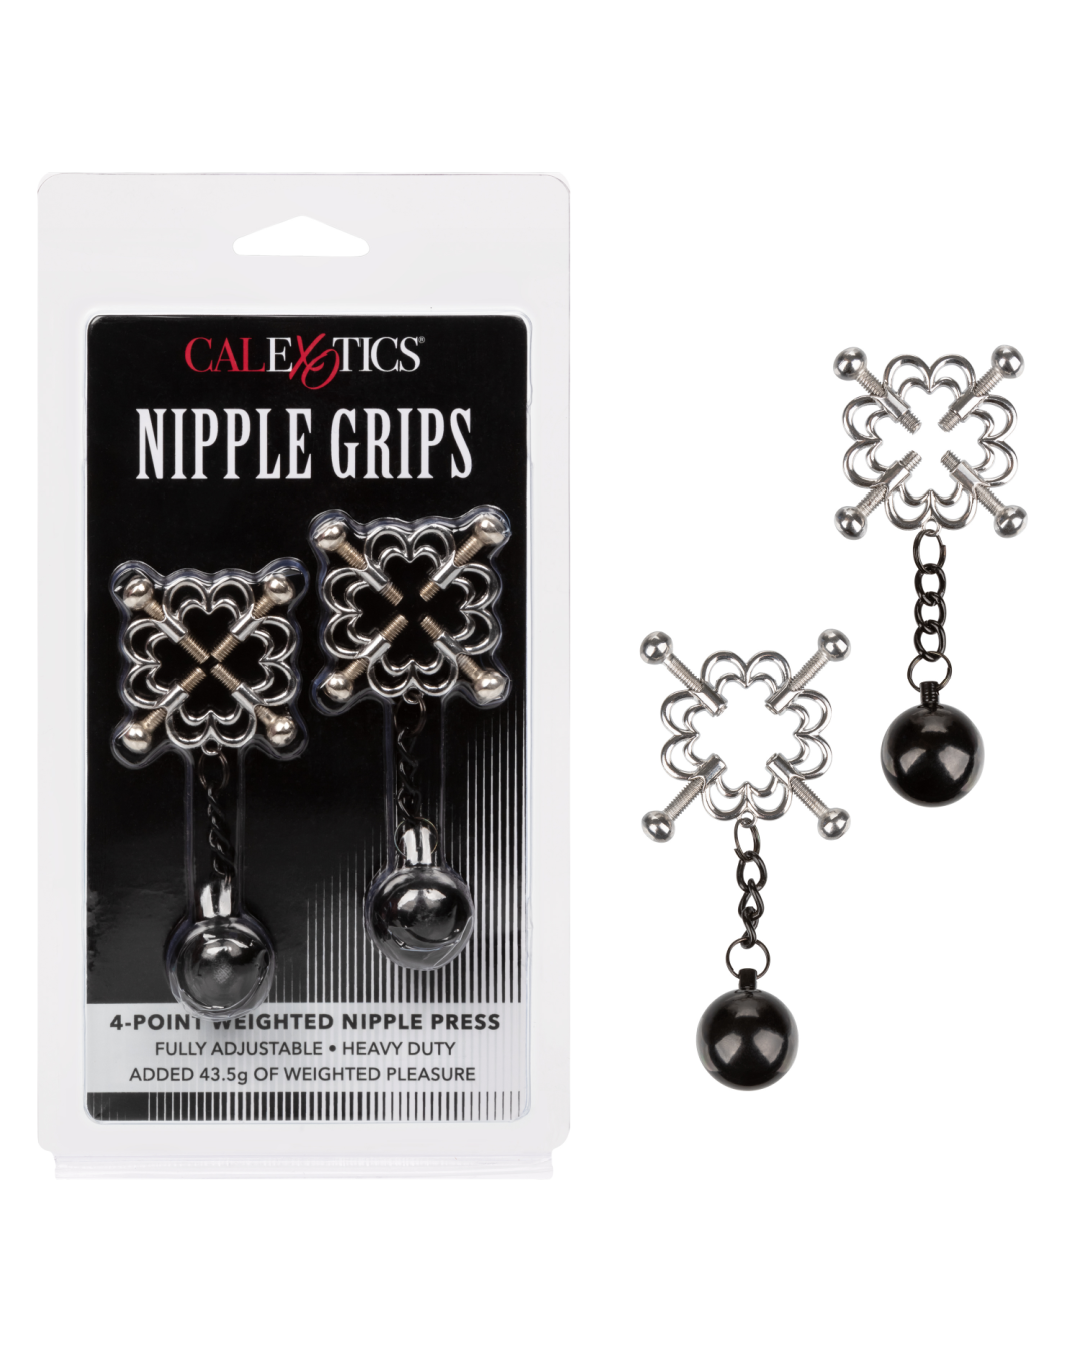 Nipple Grips 4-Point Weighted Nipple Press - set of 2 with packaging on white background